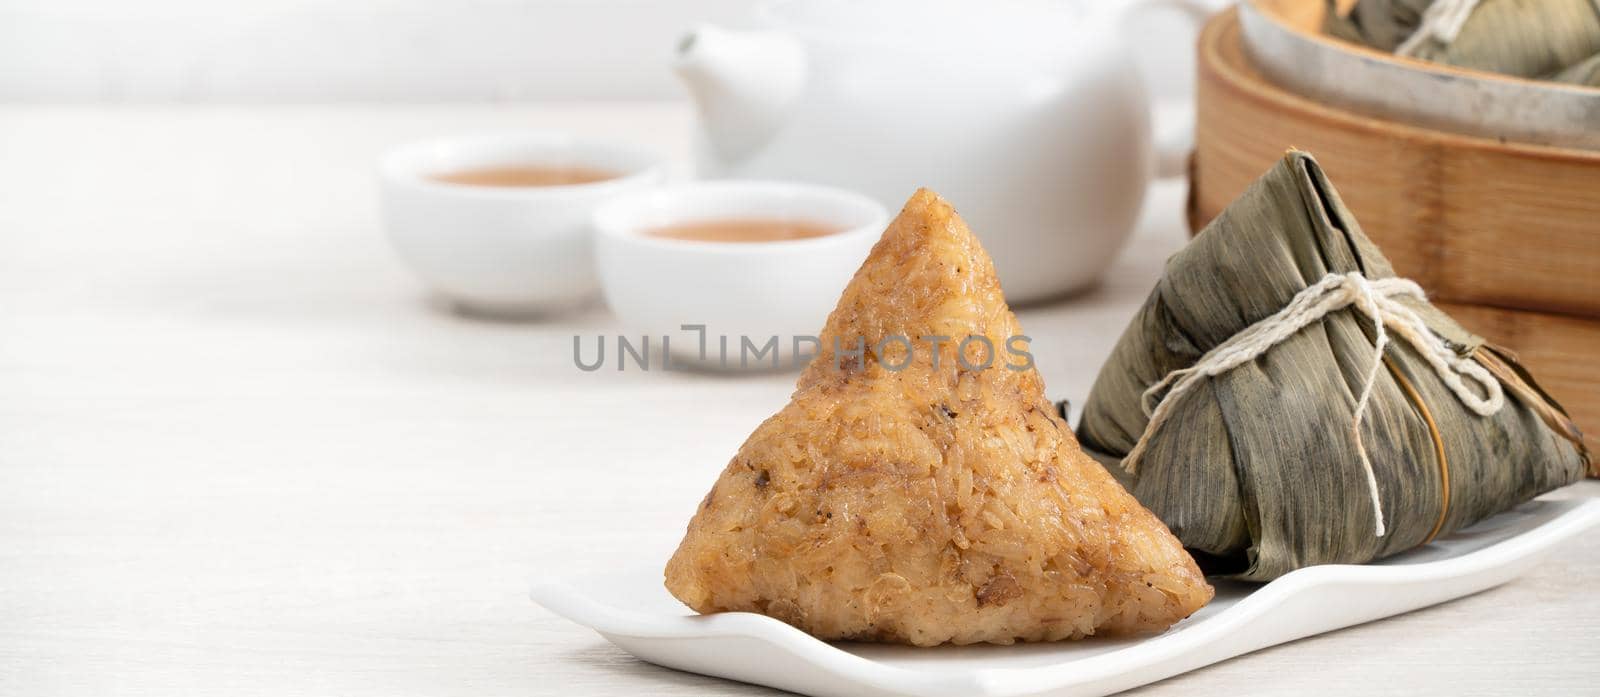 Zongzi. Rice dumpling for Chinese traditional Dragon Boat Festival (Duanwu Festival) on bright wooden table background.